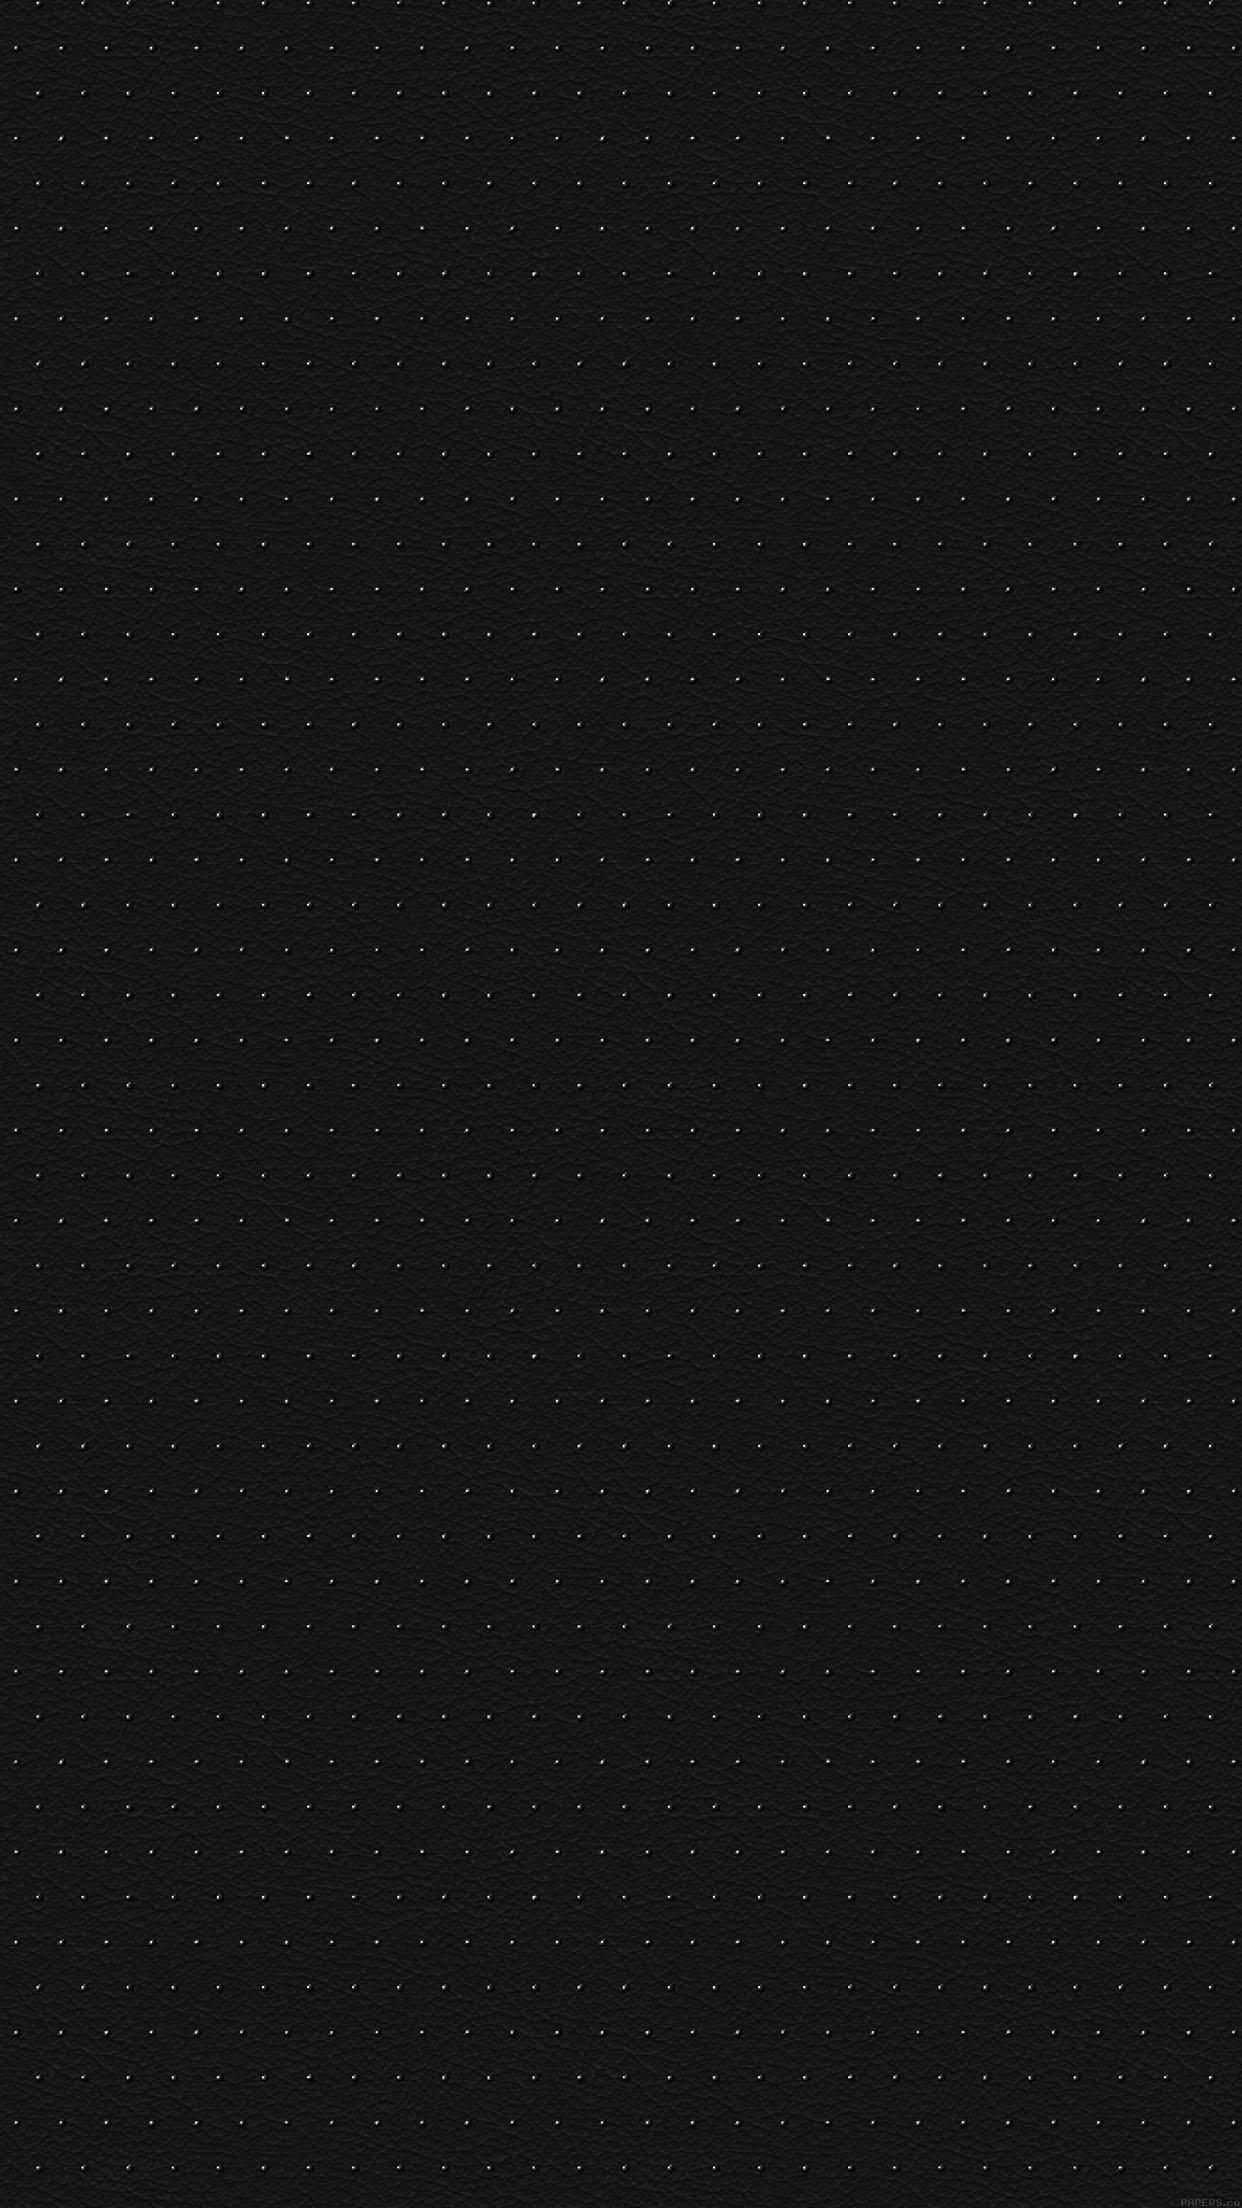 Black Iphone Wallpapers Top Free Black Iphone Backgrounds Images, Photos, Reviews